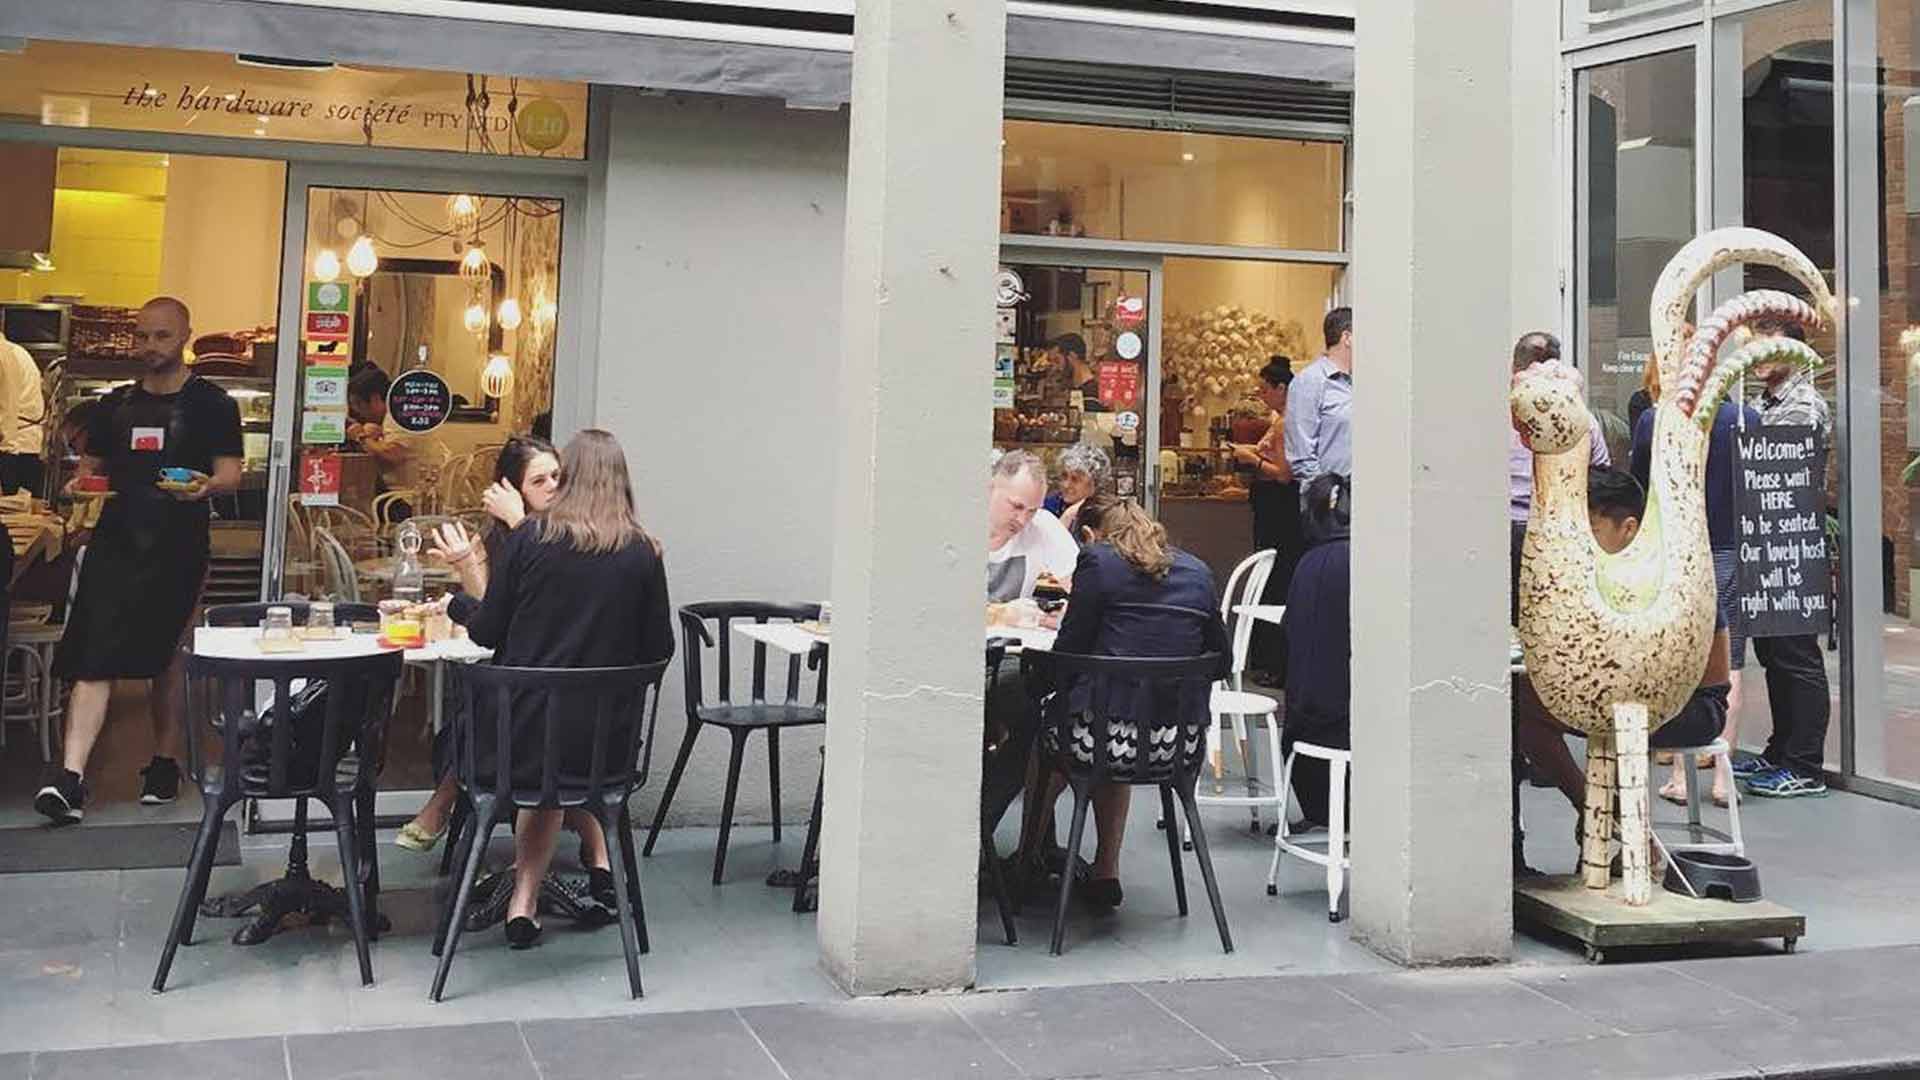 CBD Cafe Hardware Societe Has Closed Indefinitely After More Than a Decade